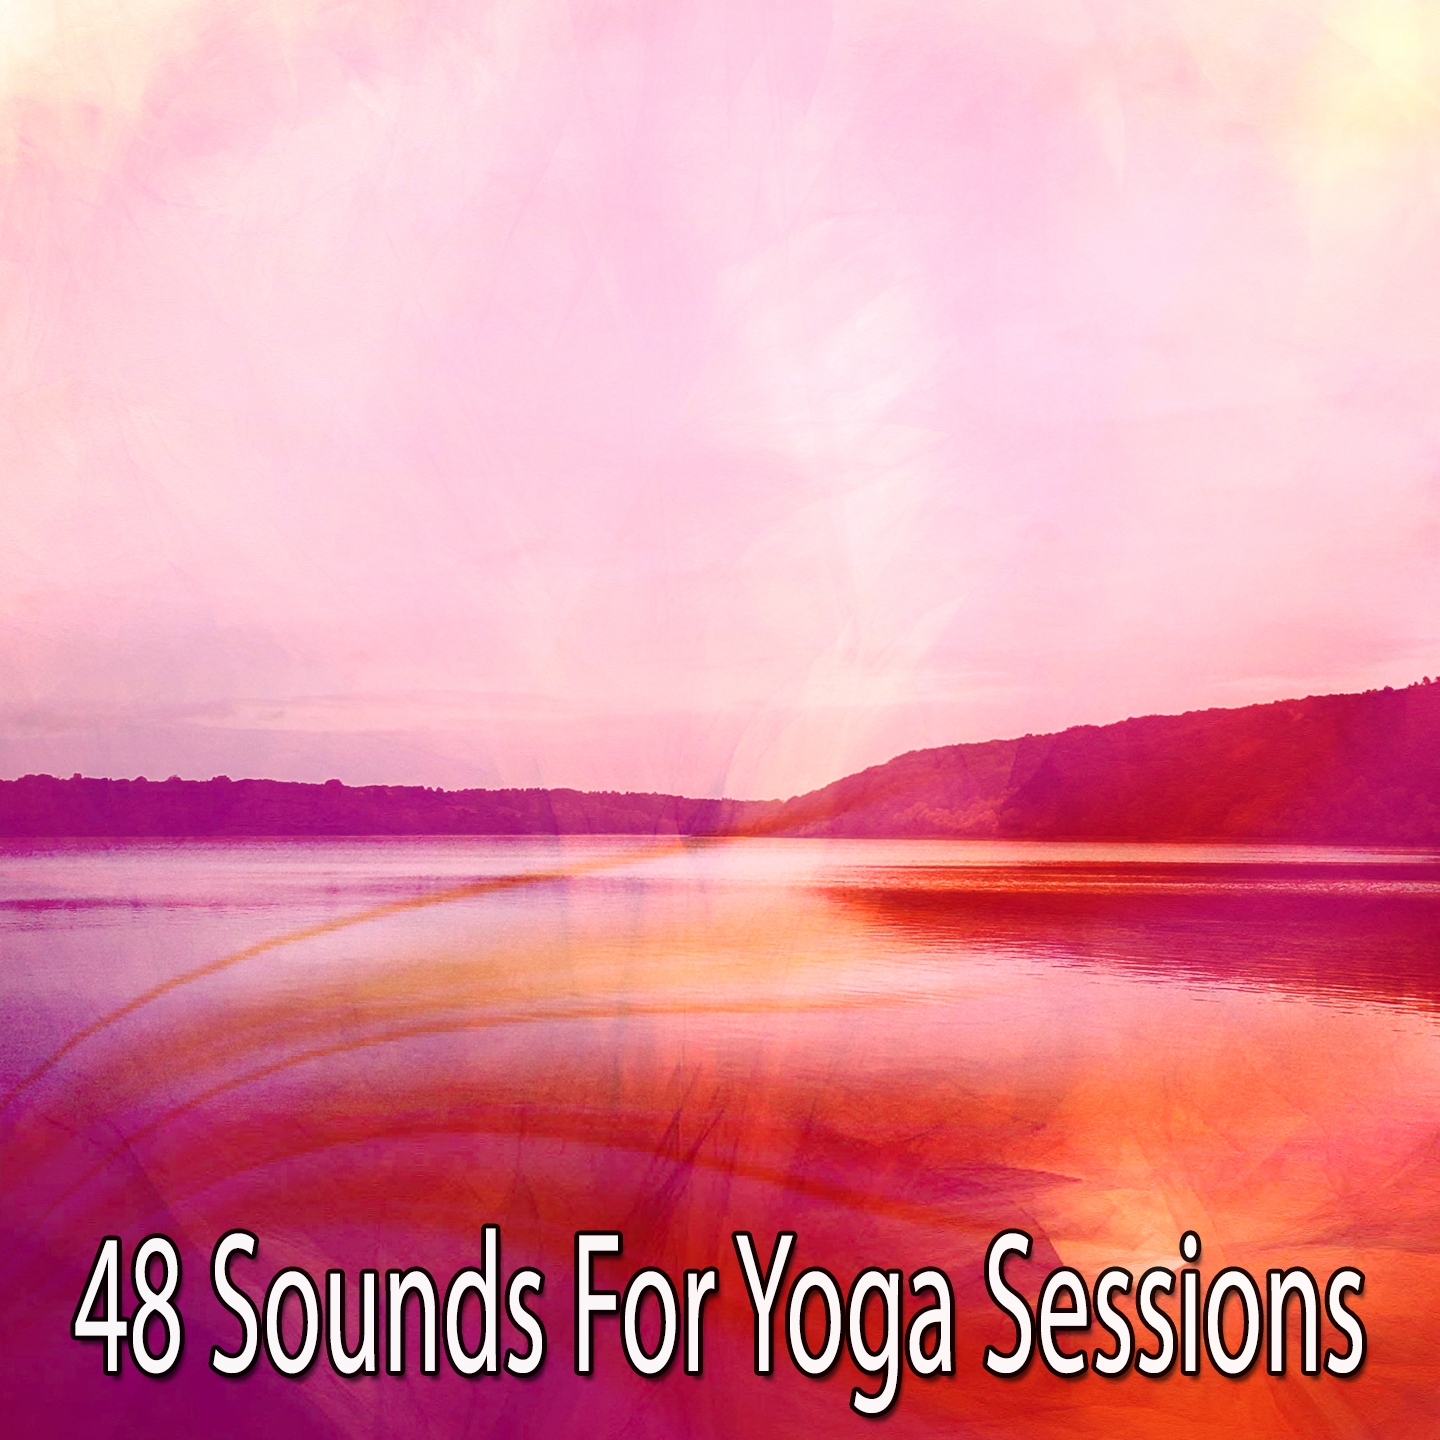 48 Sounds For Yoga Sessions